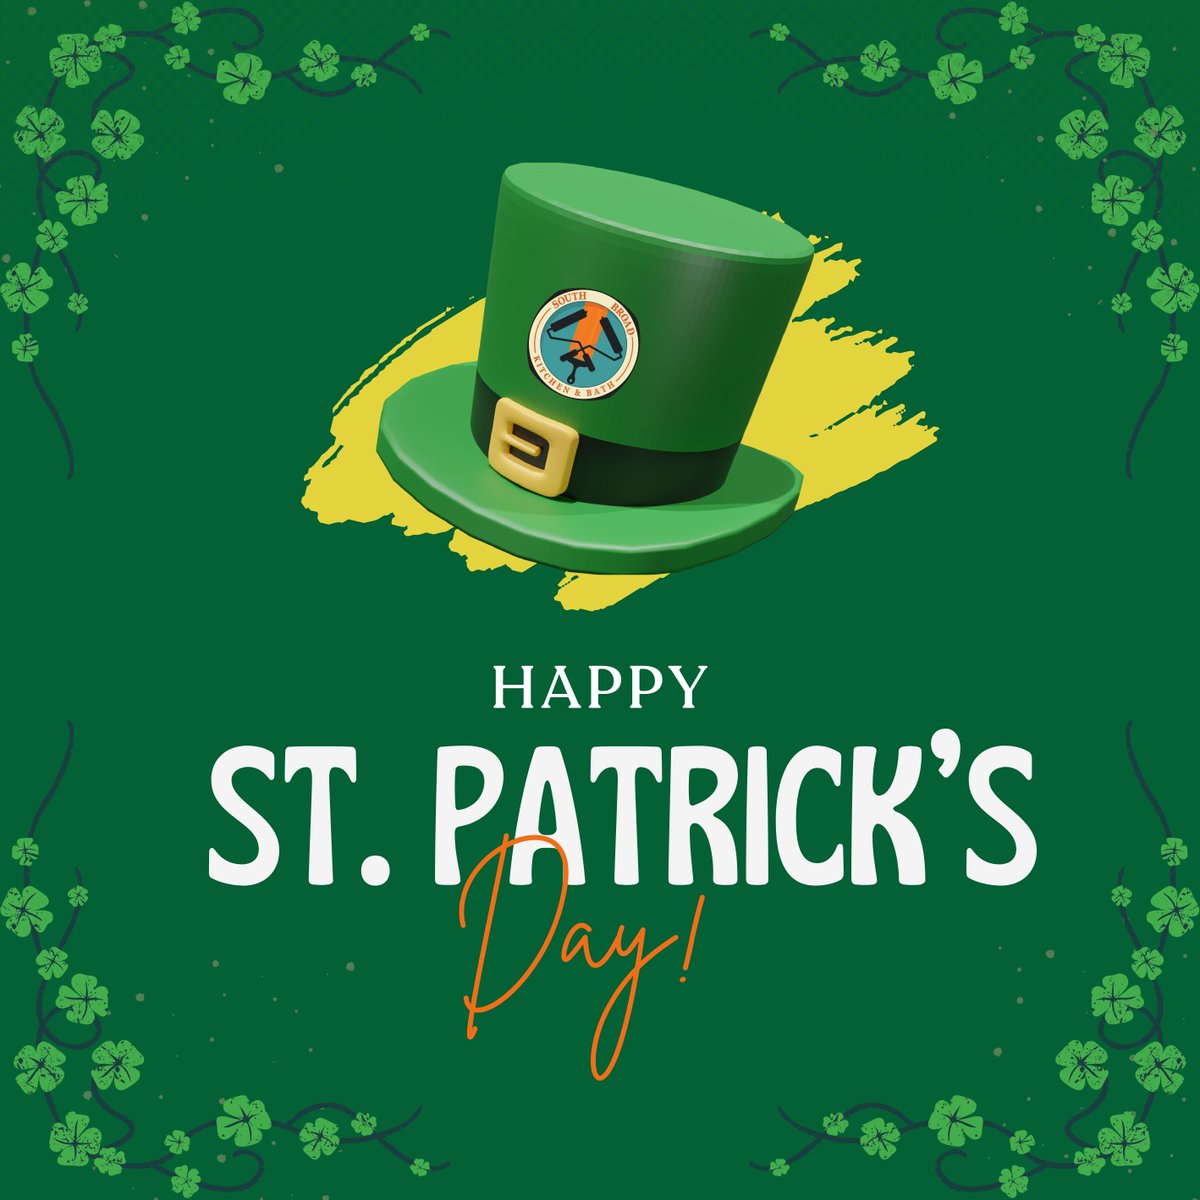 This St. Patrick's Day, don't rely on luck to get the home of your dreams, rely on us! 🍀

Our team is here to guide you through every step of your renovation journey. Happy St. Patrick's Day. #southbroadkitchenbath #southbroadpaintcenter #happystpatricksday #stpatricksday